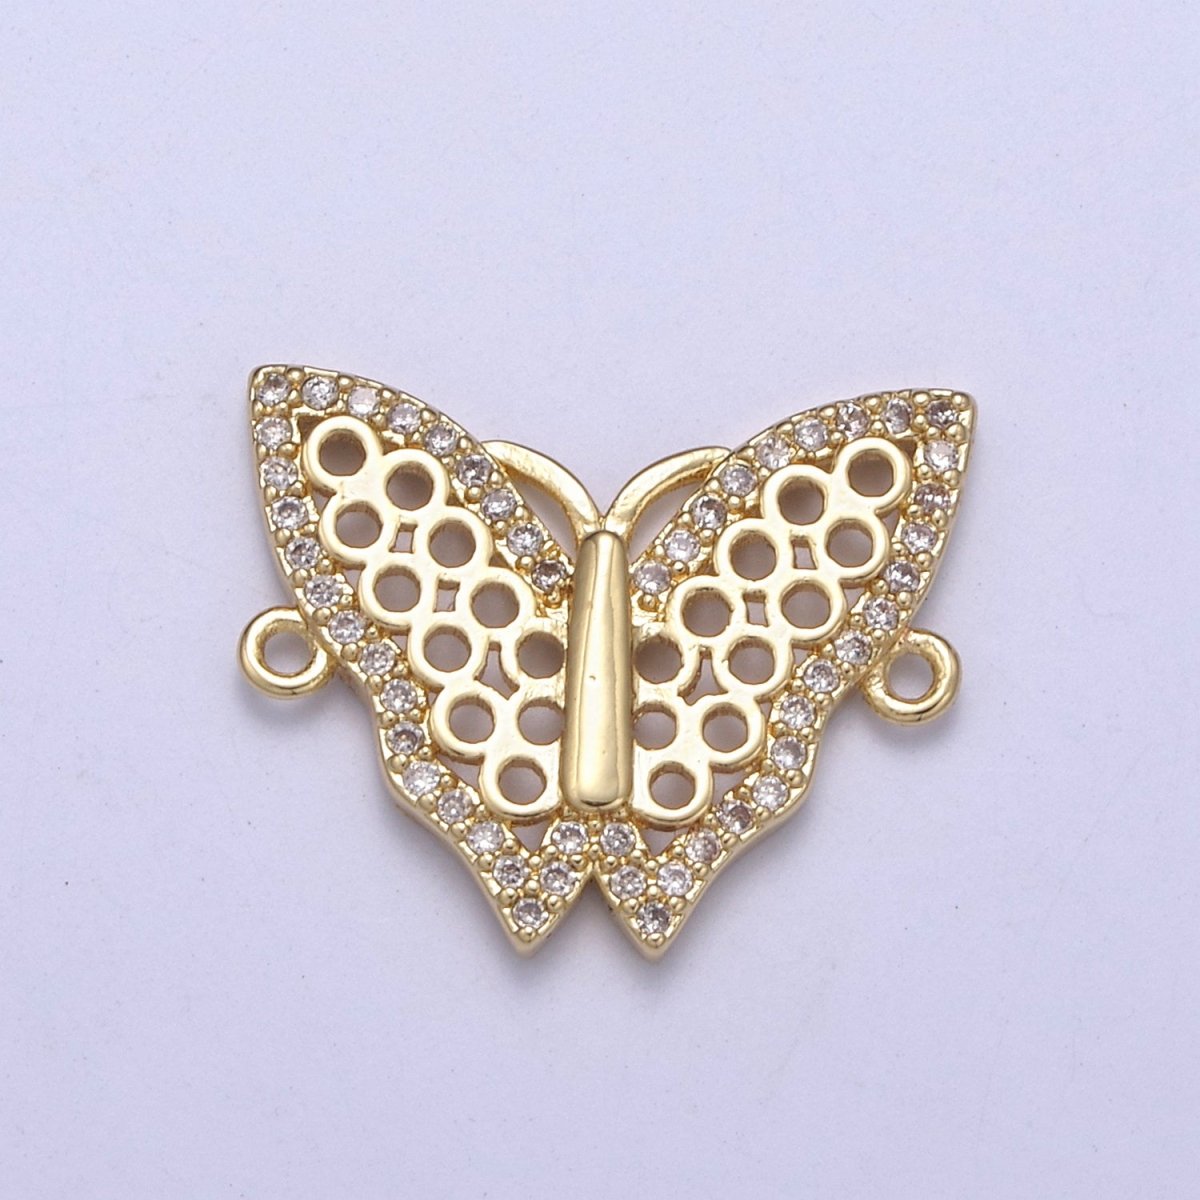 Dainty Gold Mariposa Butterfly Charm Connector for Bracelet Necklace Supply F-682 - DLUXCA